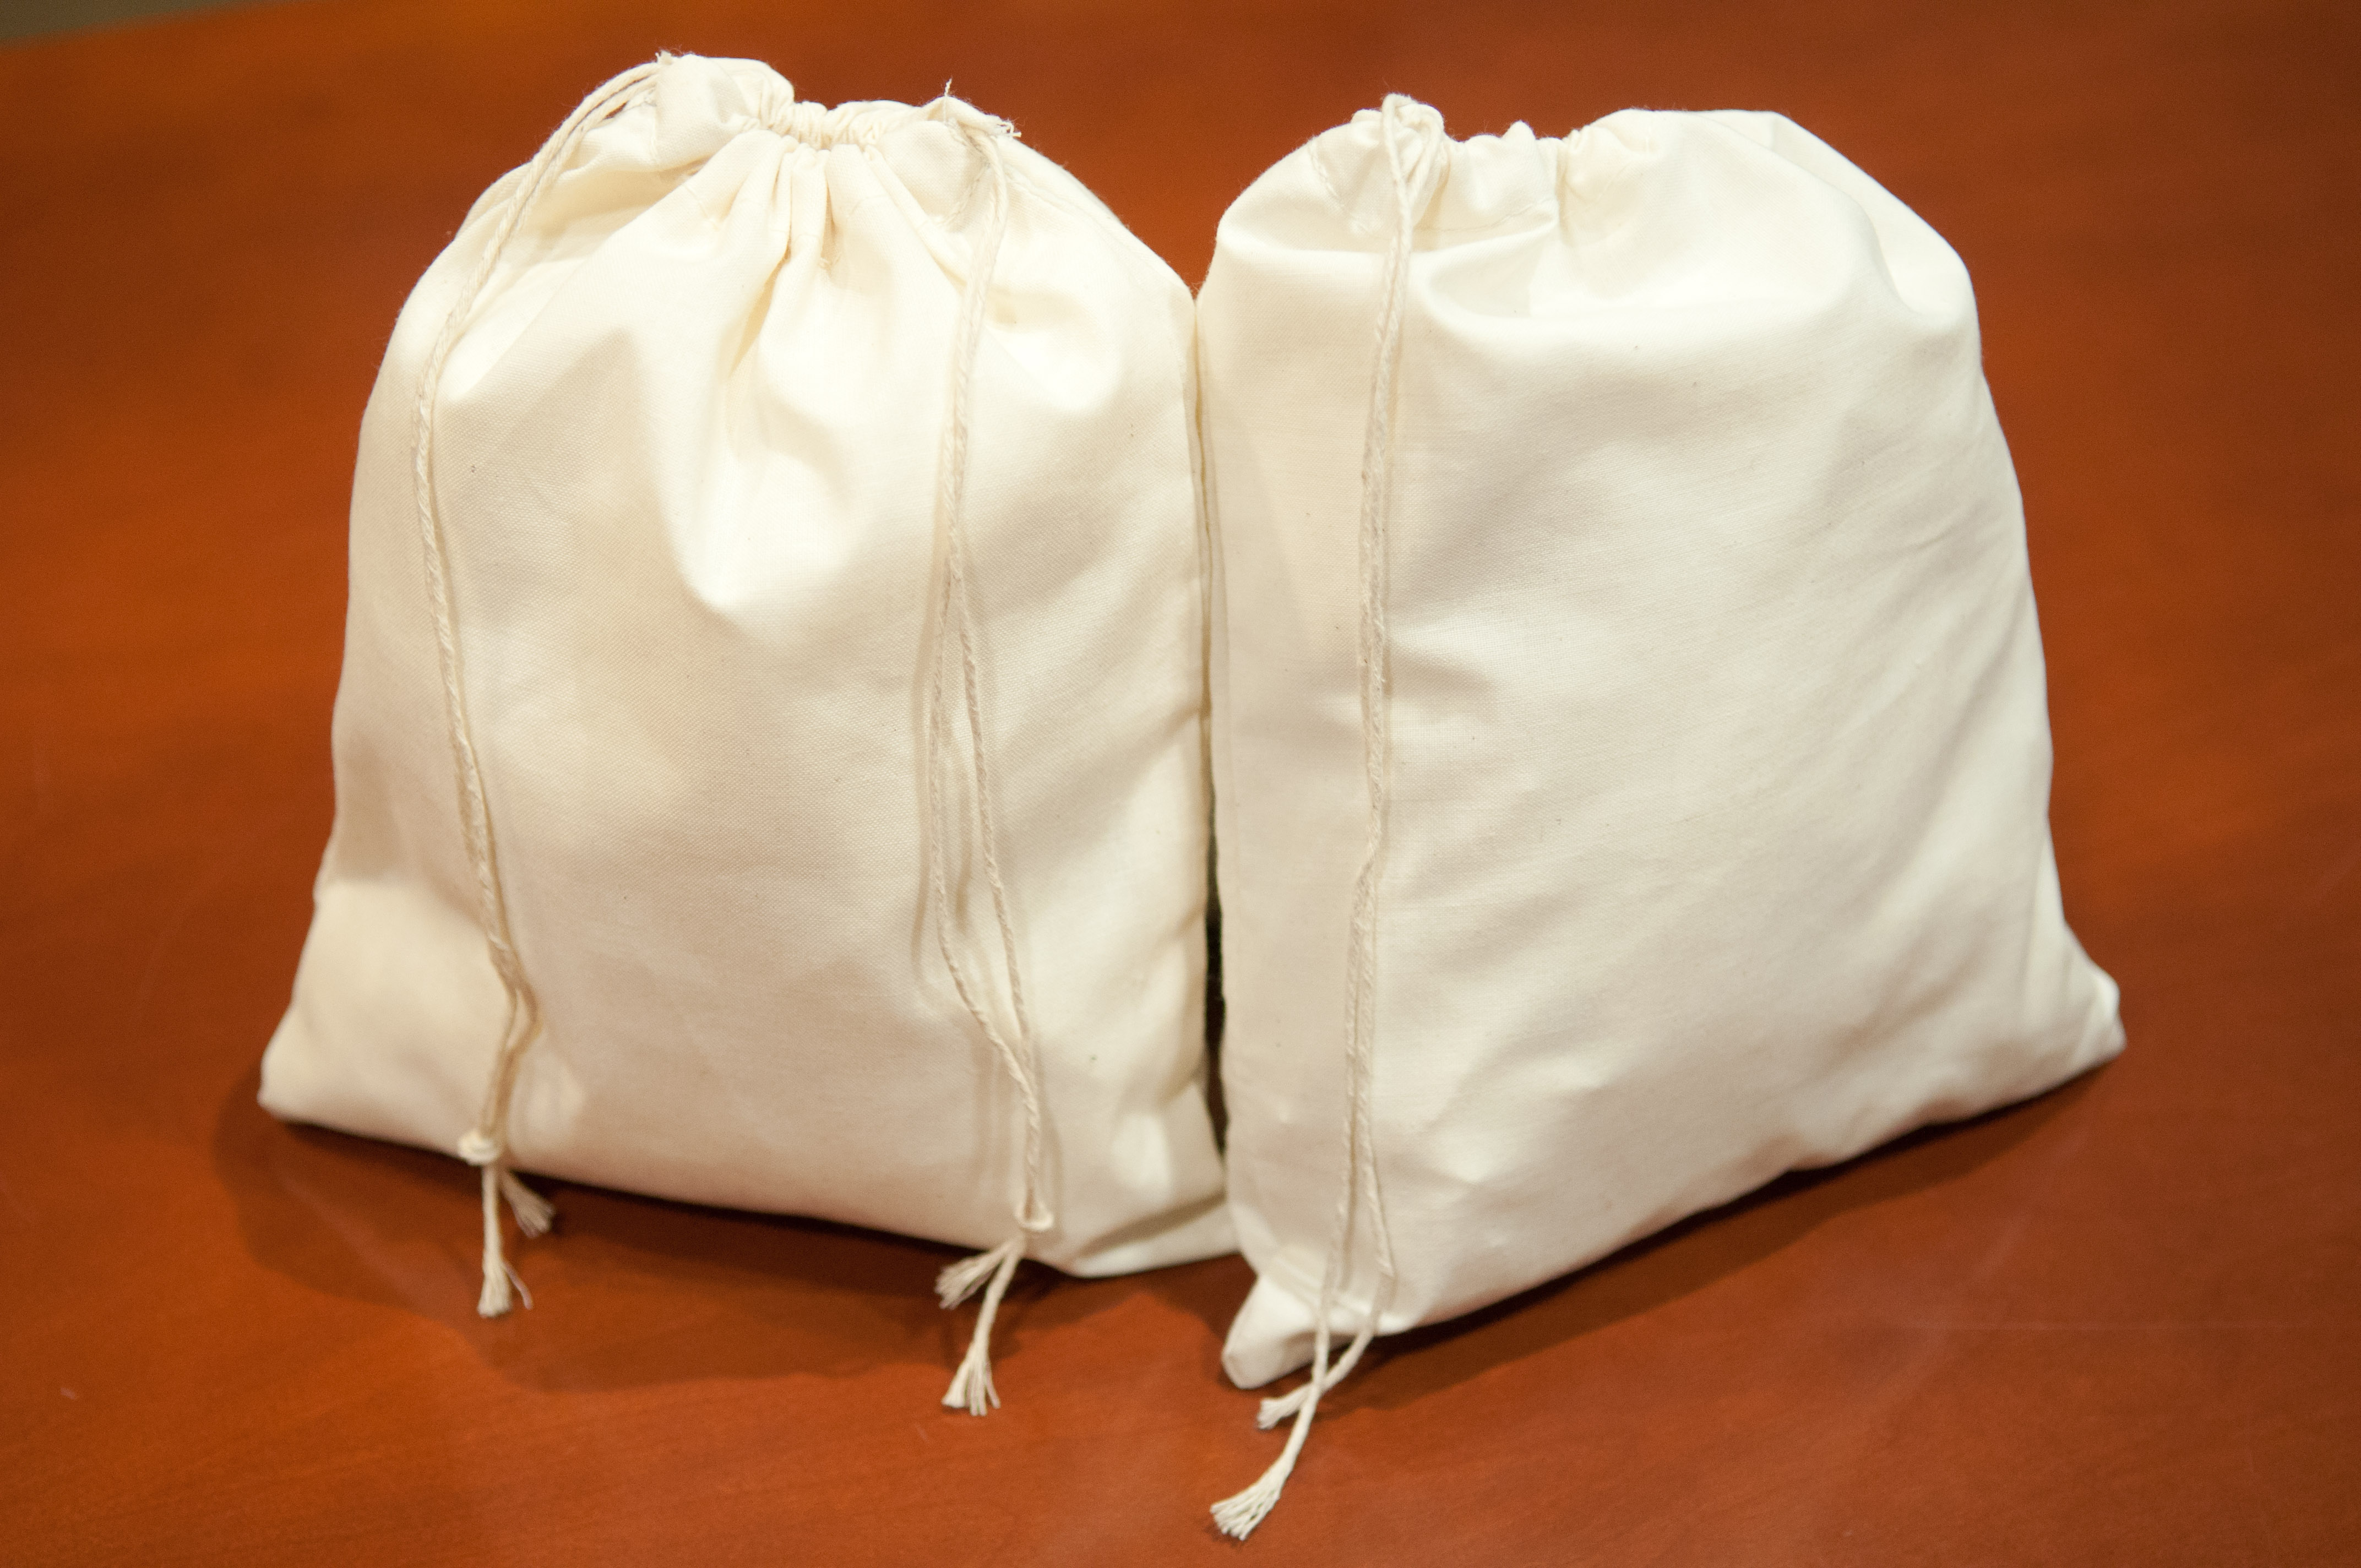 Wholesale Muslin Bags Review With Better Life Bags